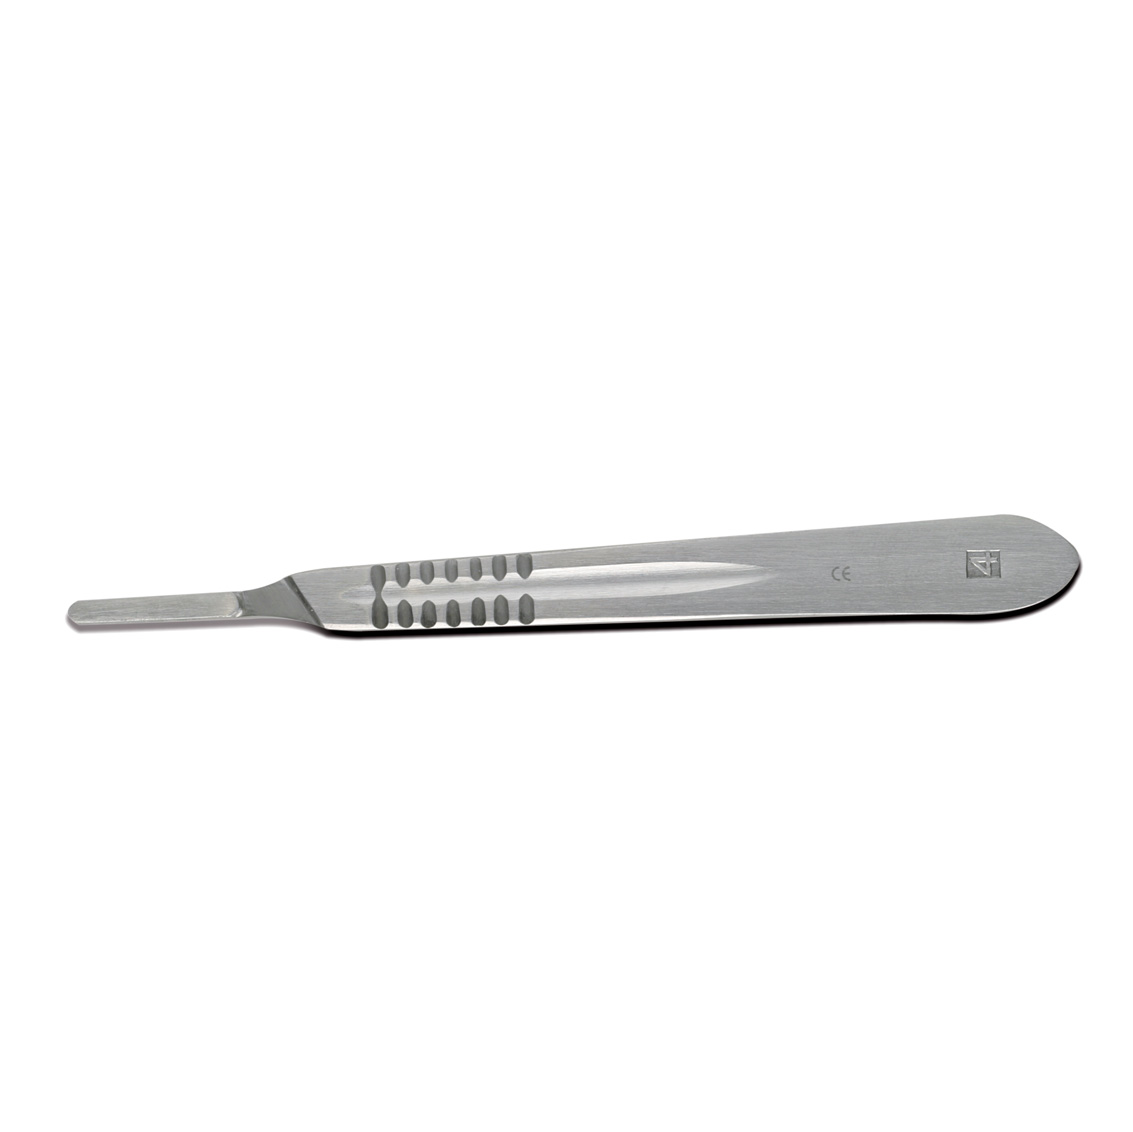 Handle for stainless steel scalpel blades size 4